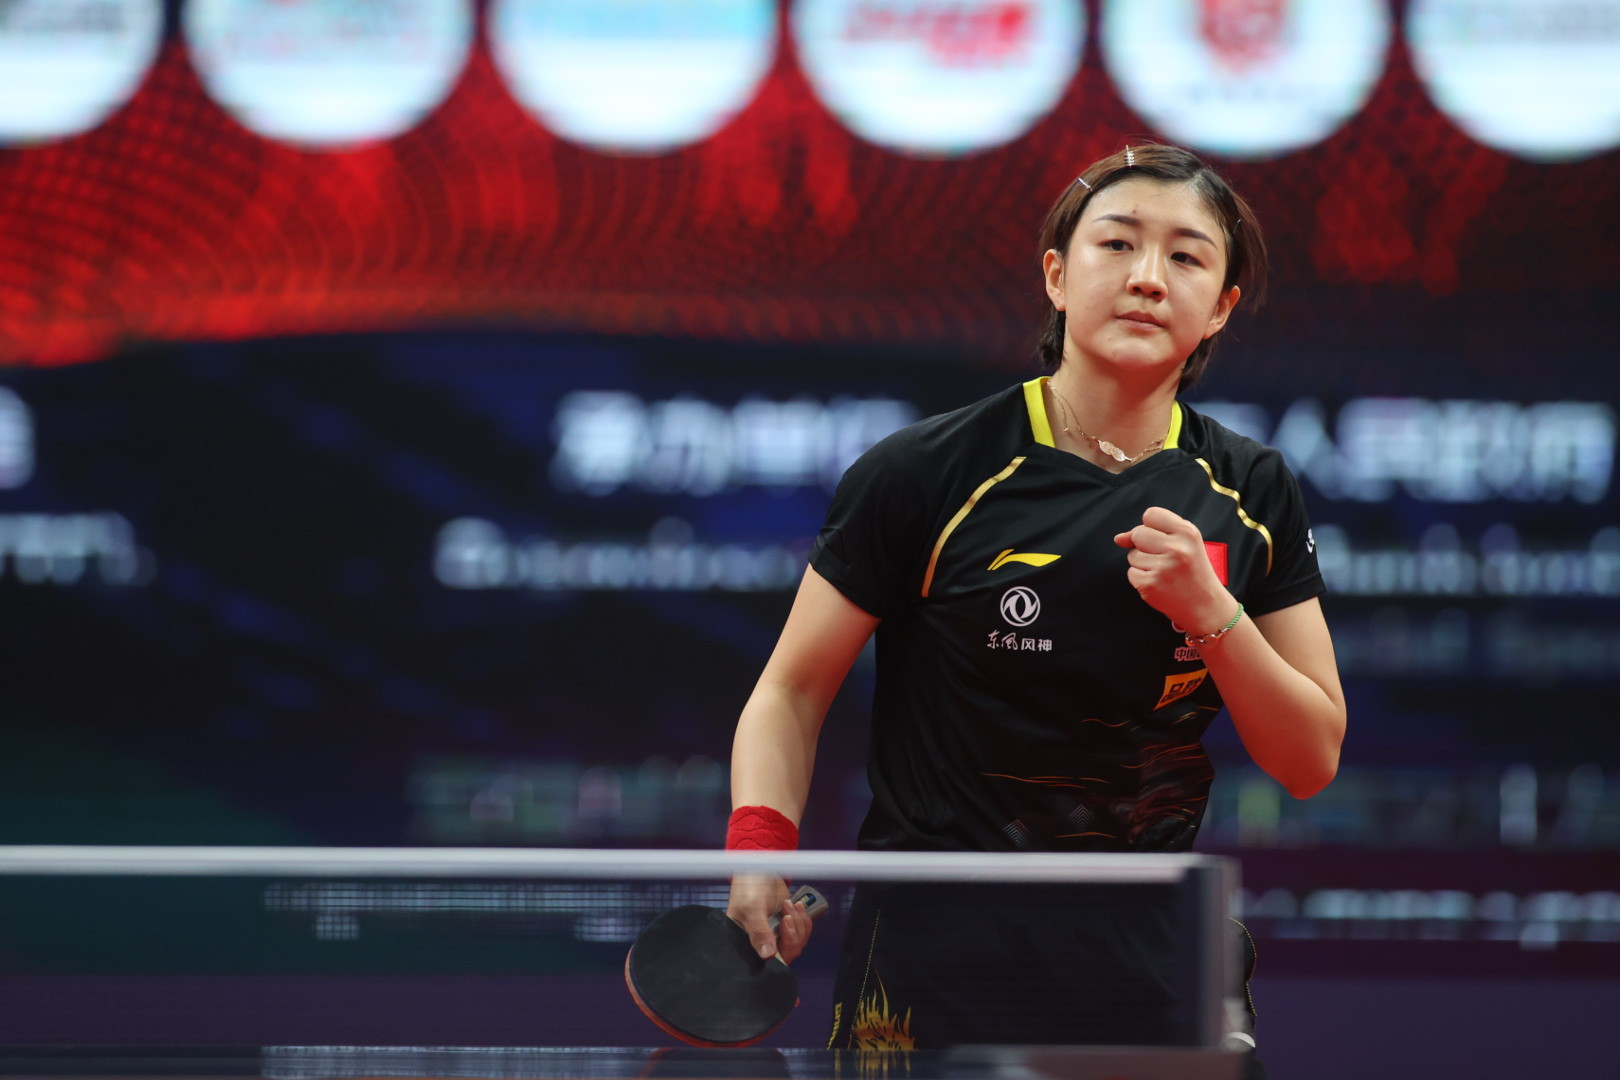 World number one Chen Meng said she felt 